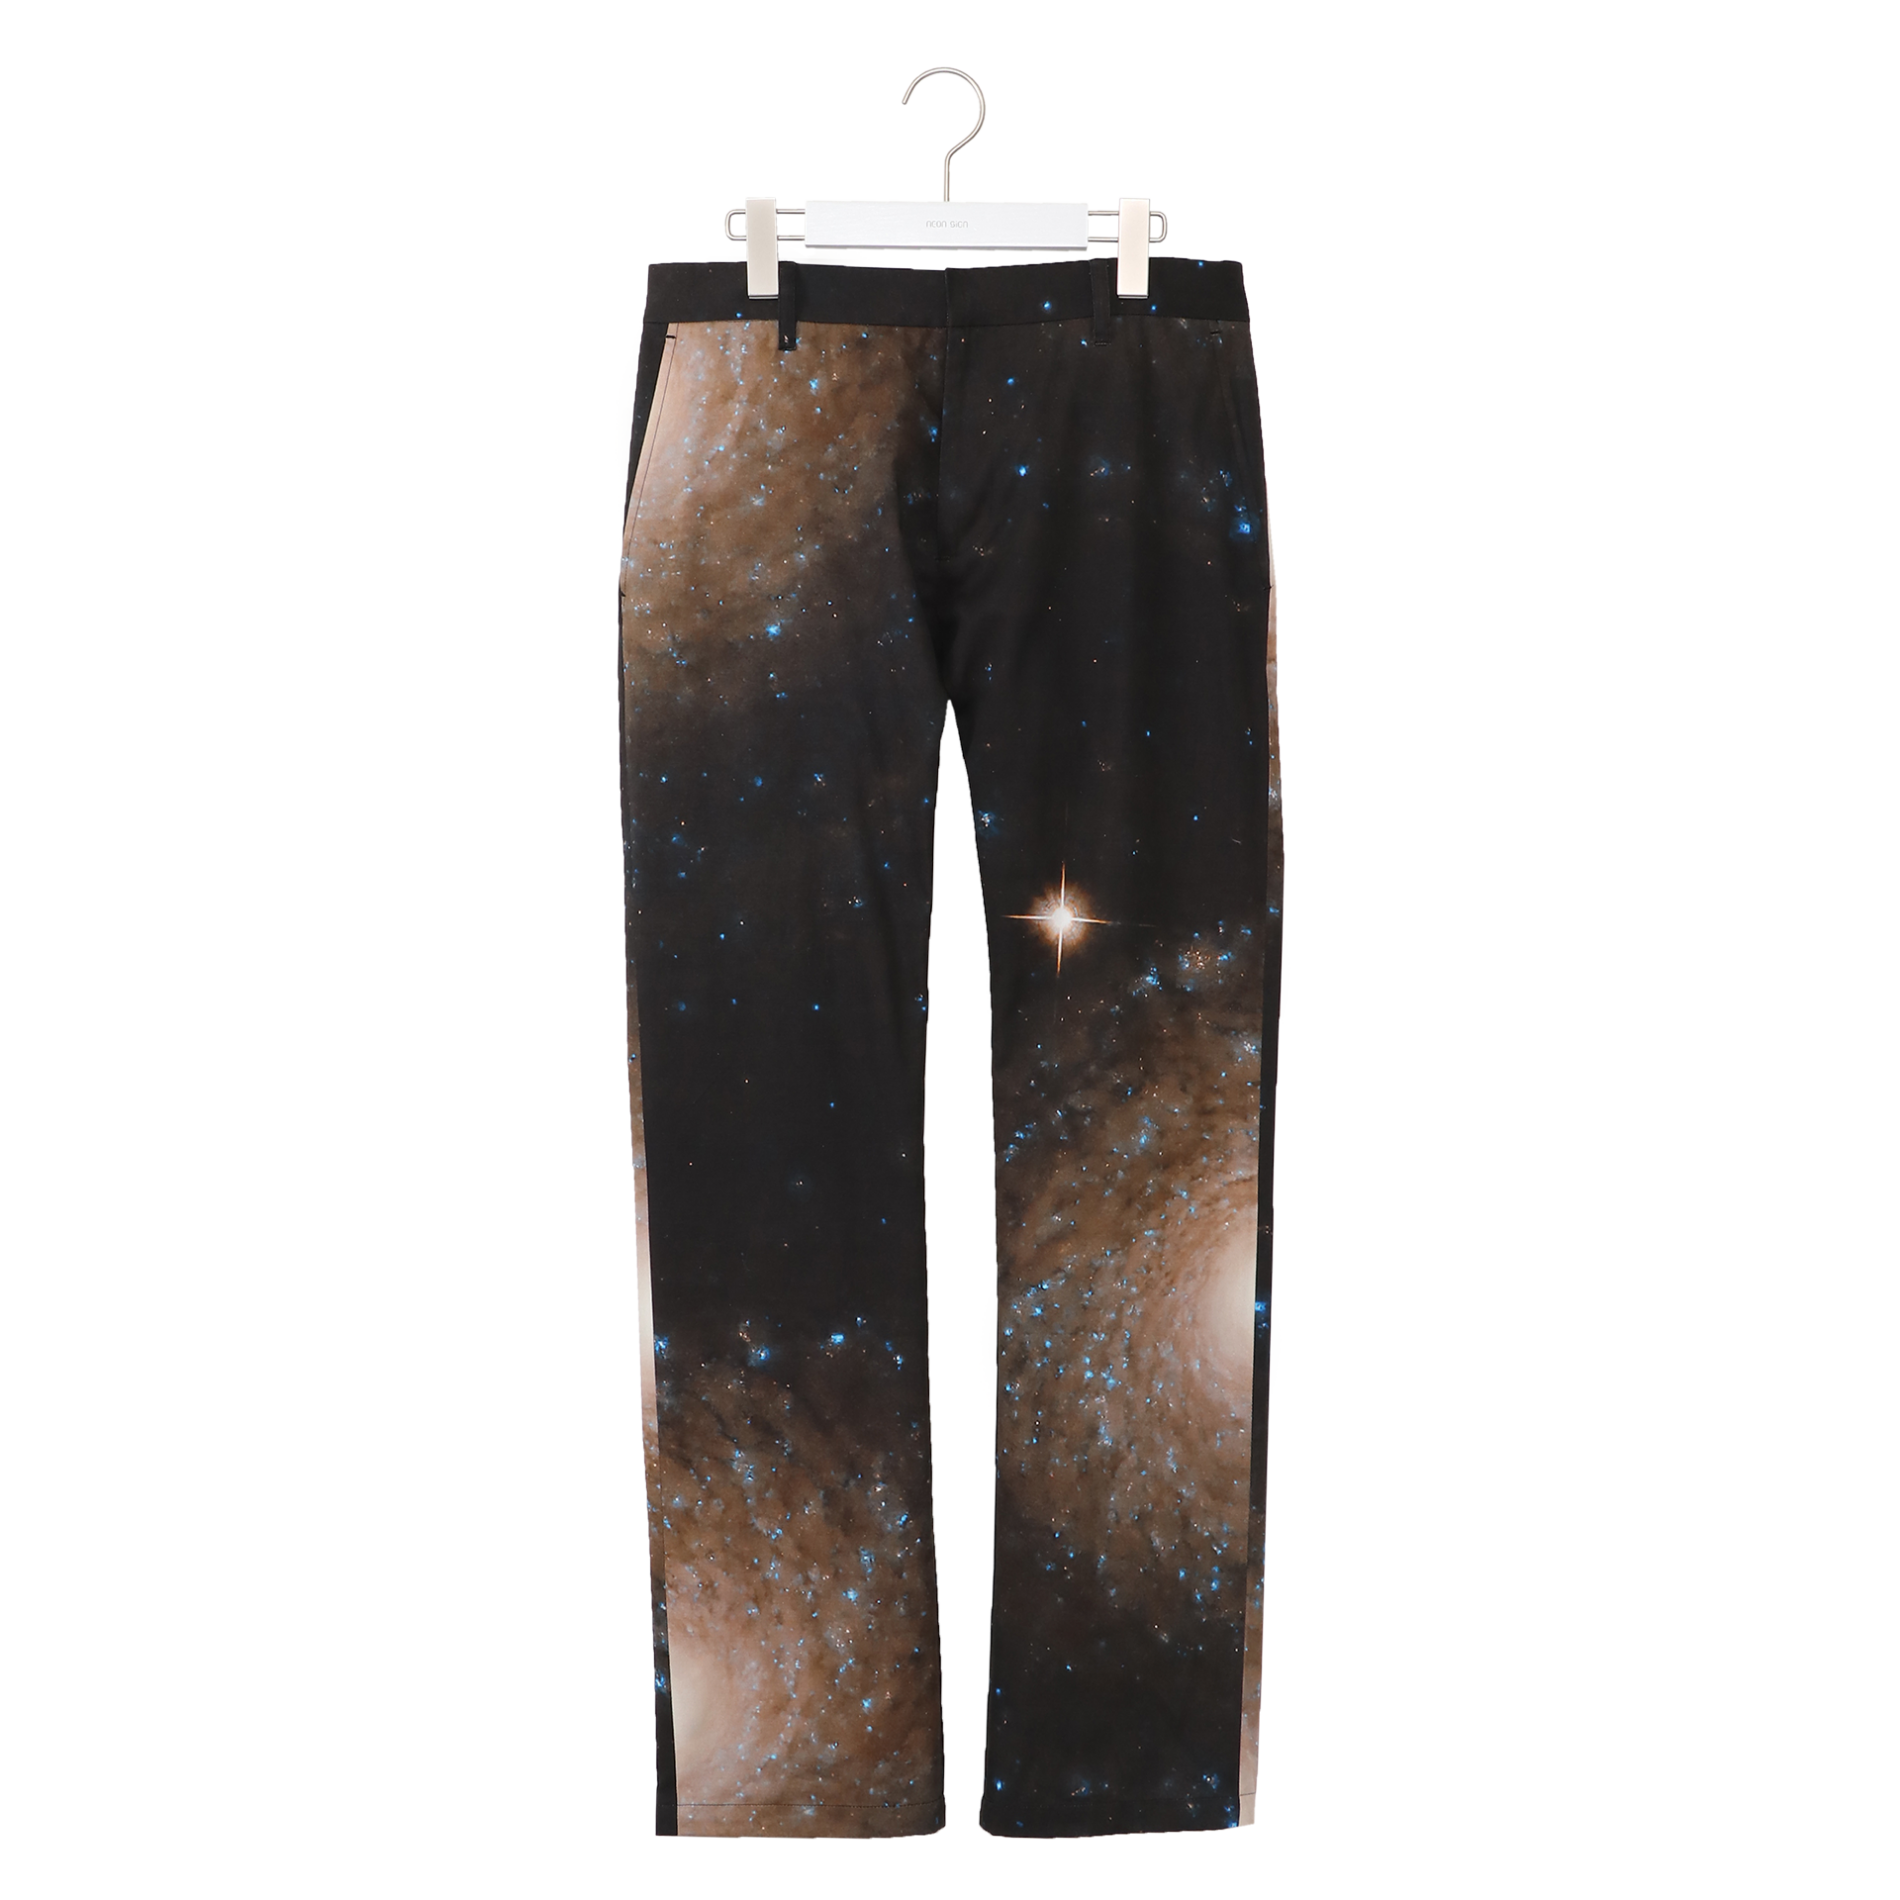 COSMO BARRED SPIRAL COTTON TWILL PANTS BLACK